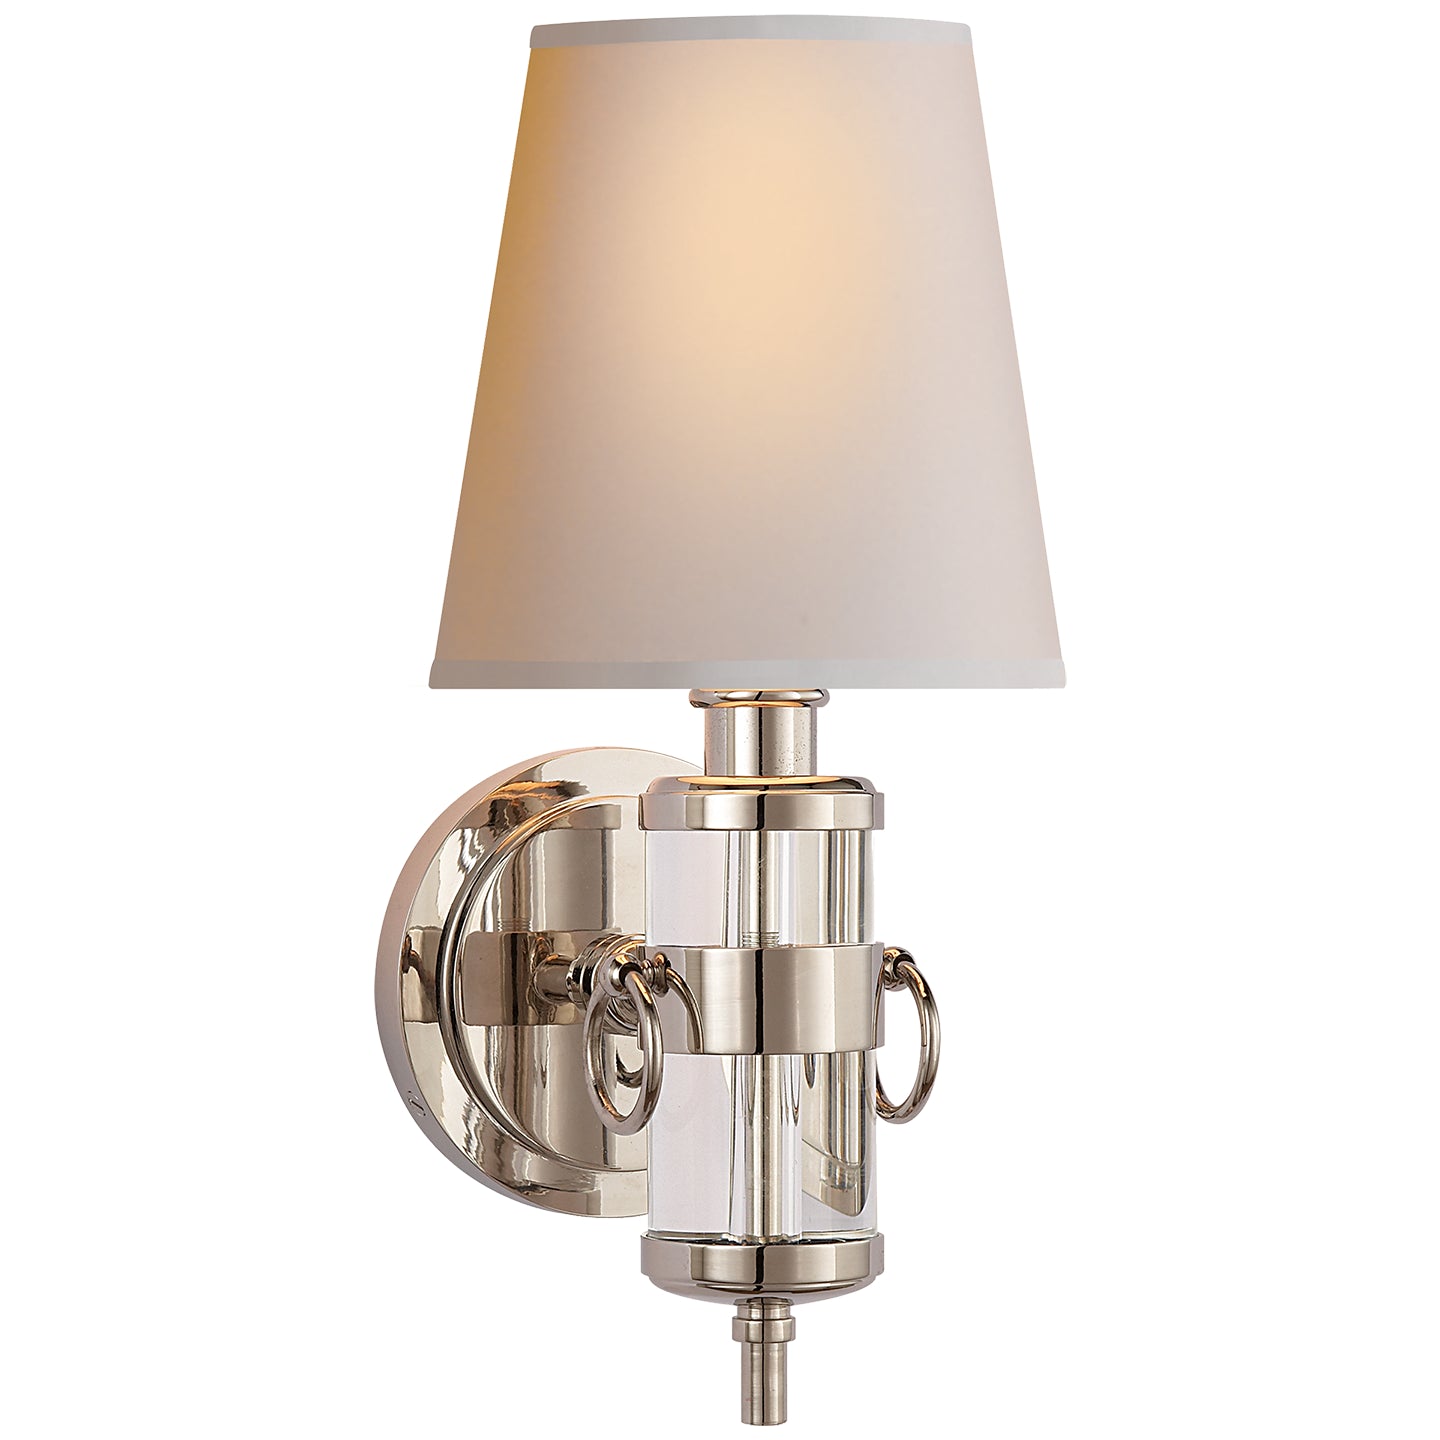 Load image into Gallery viewer, Visual Comfort Signature - TOB 2730CG-NP - One Light Wall Sconce - Jonathan - Crystal
